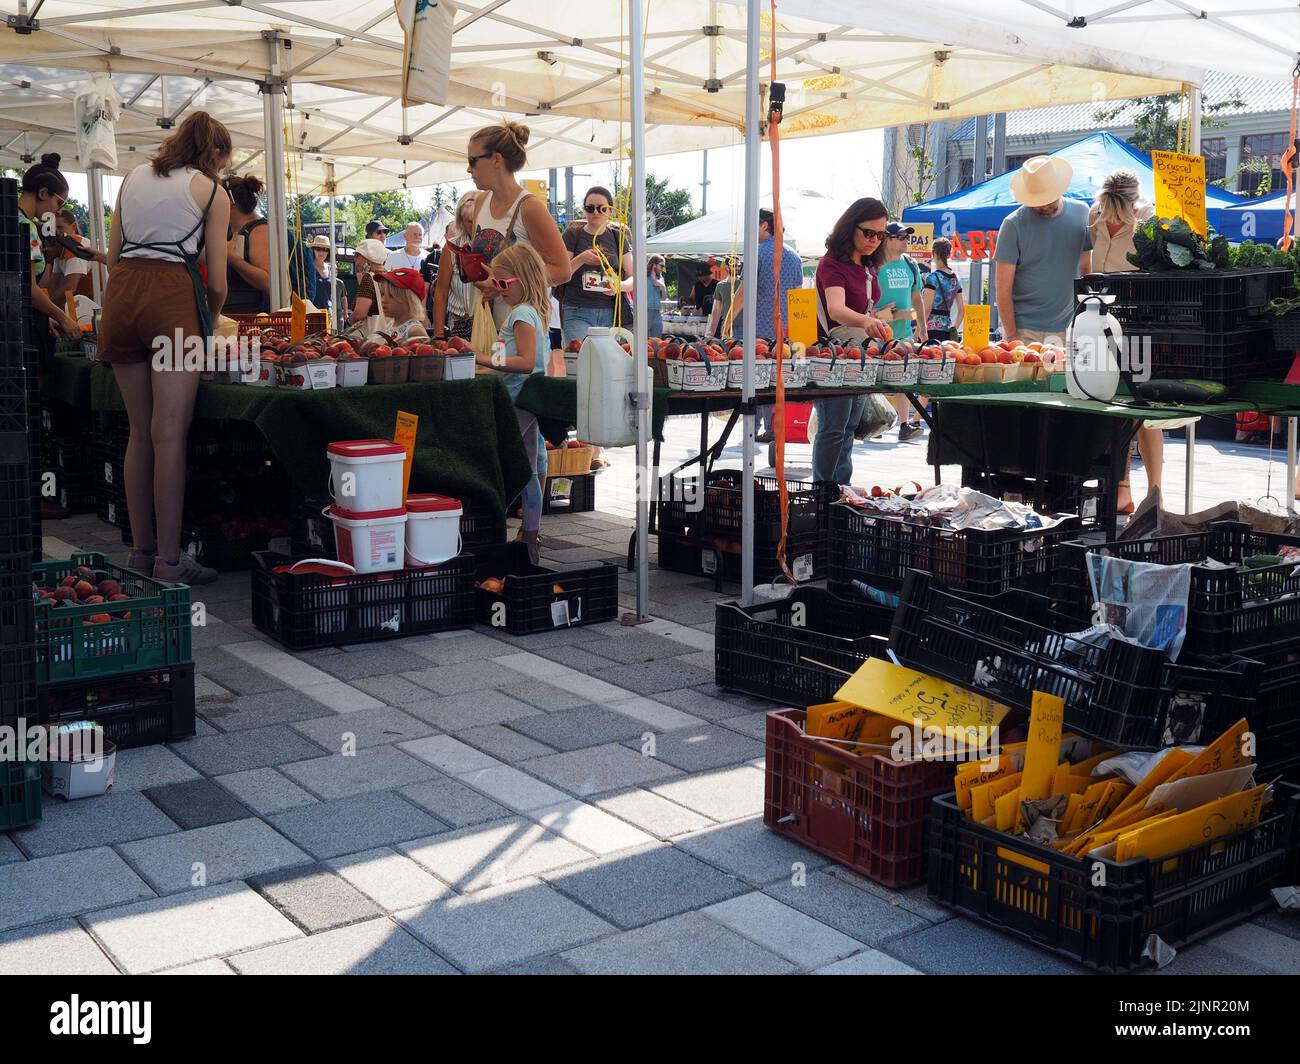 Scenes from the Farmer's Market at Lansdowne Place. Farm produce stall shaded by a tent. Ottawa, ON, Canada. Stock Photo